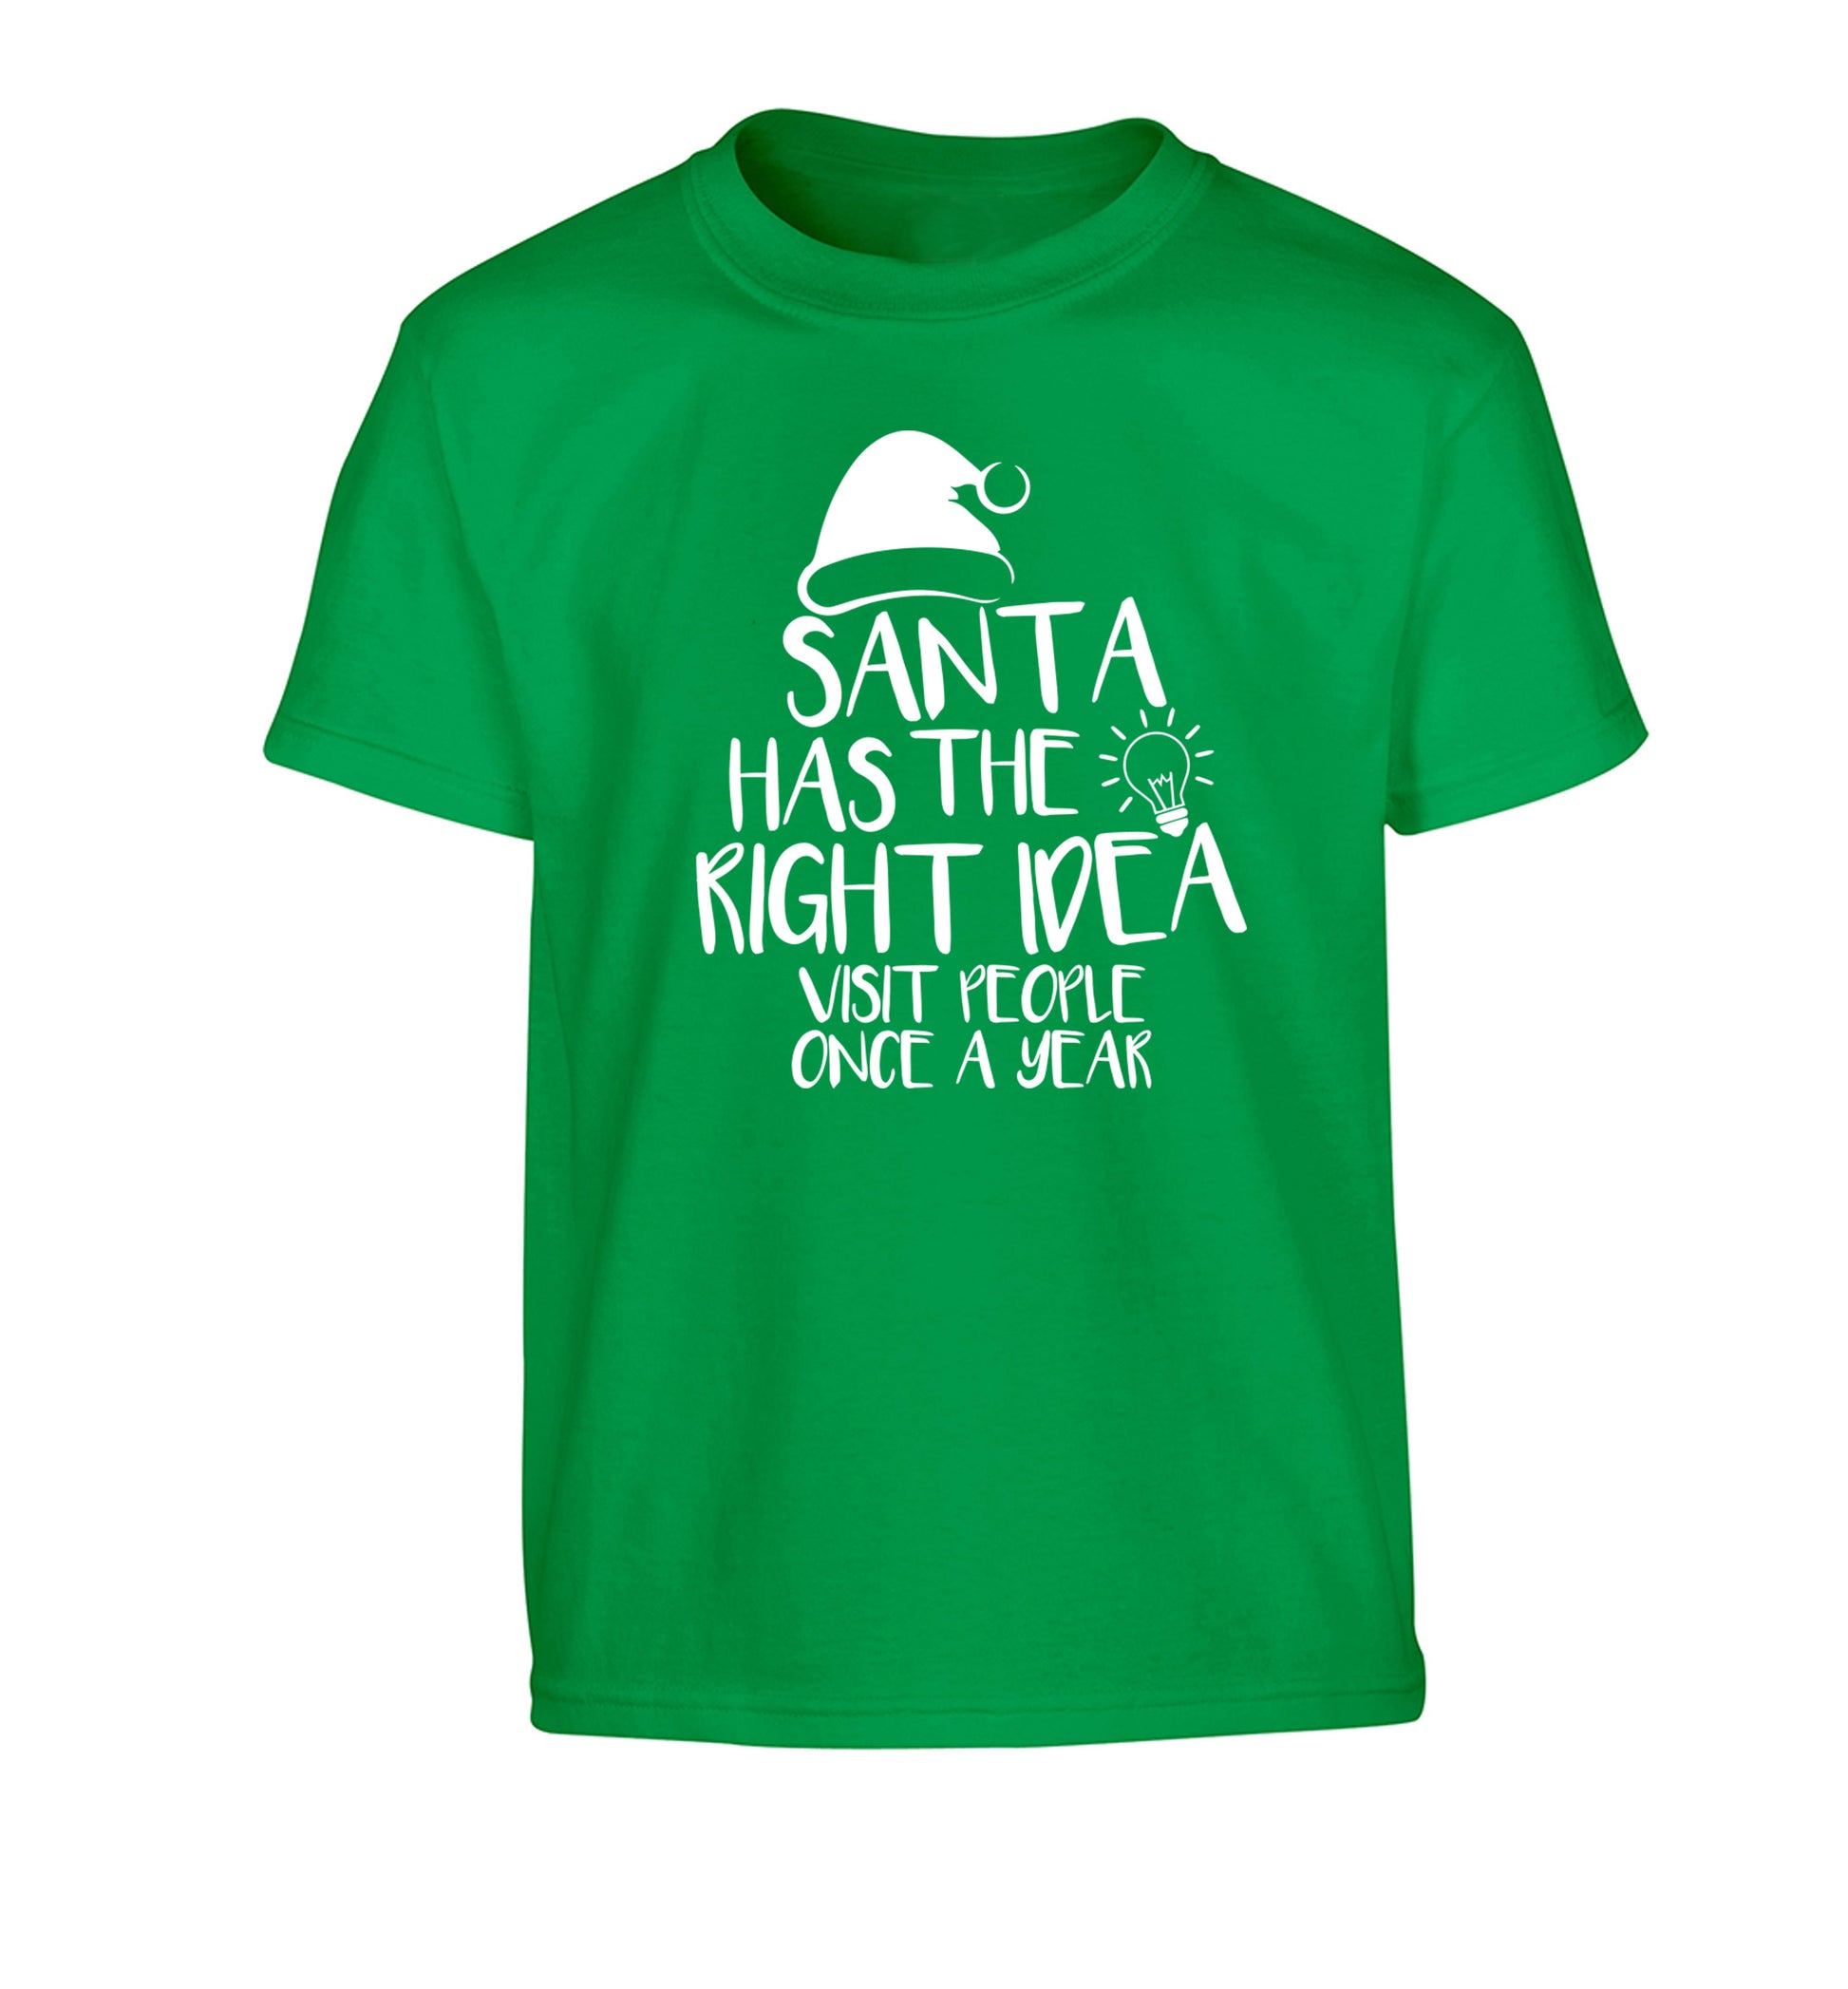 Santa has the right idea visit people once a year Children's green Tshirt 12-14 Years